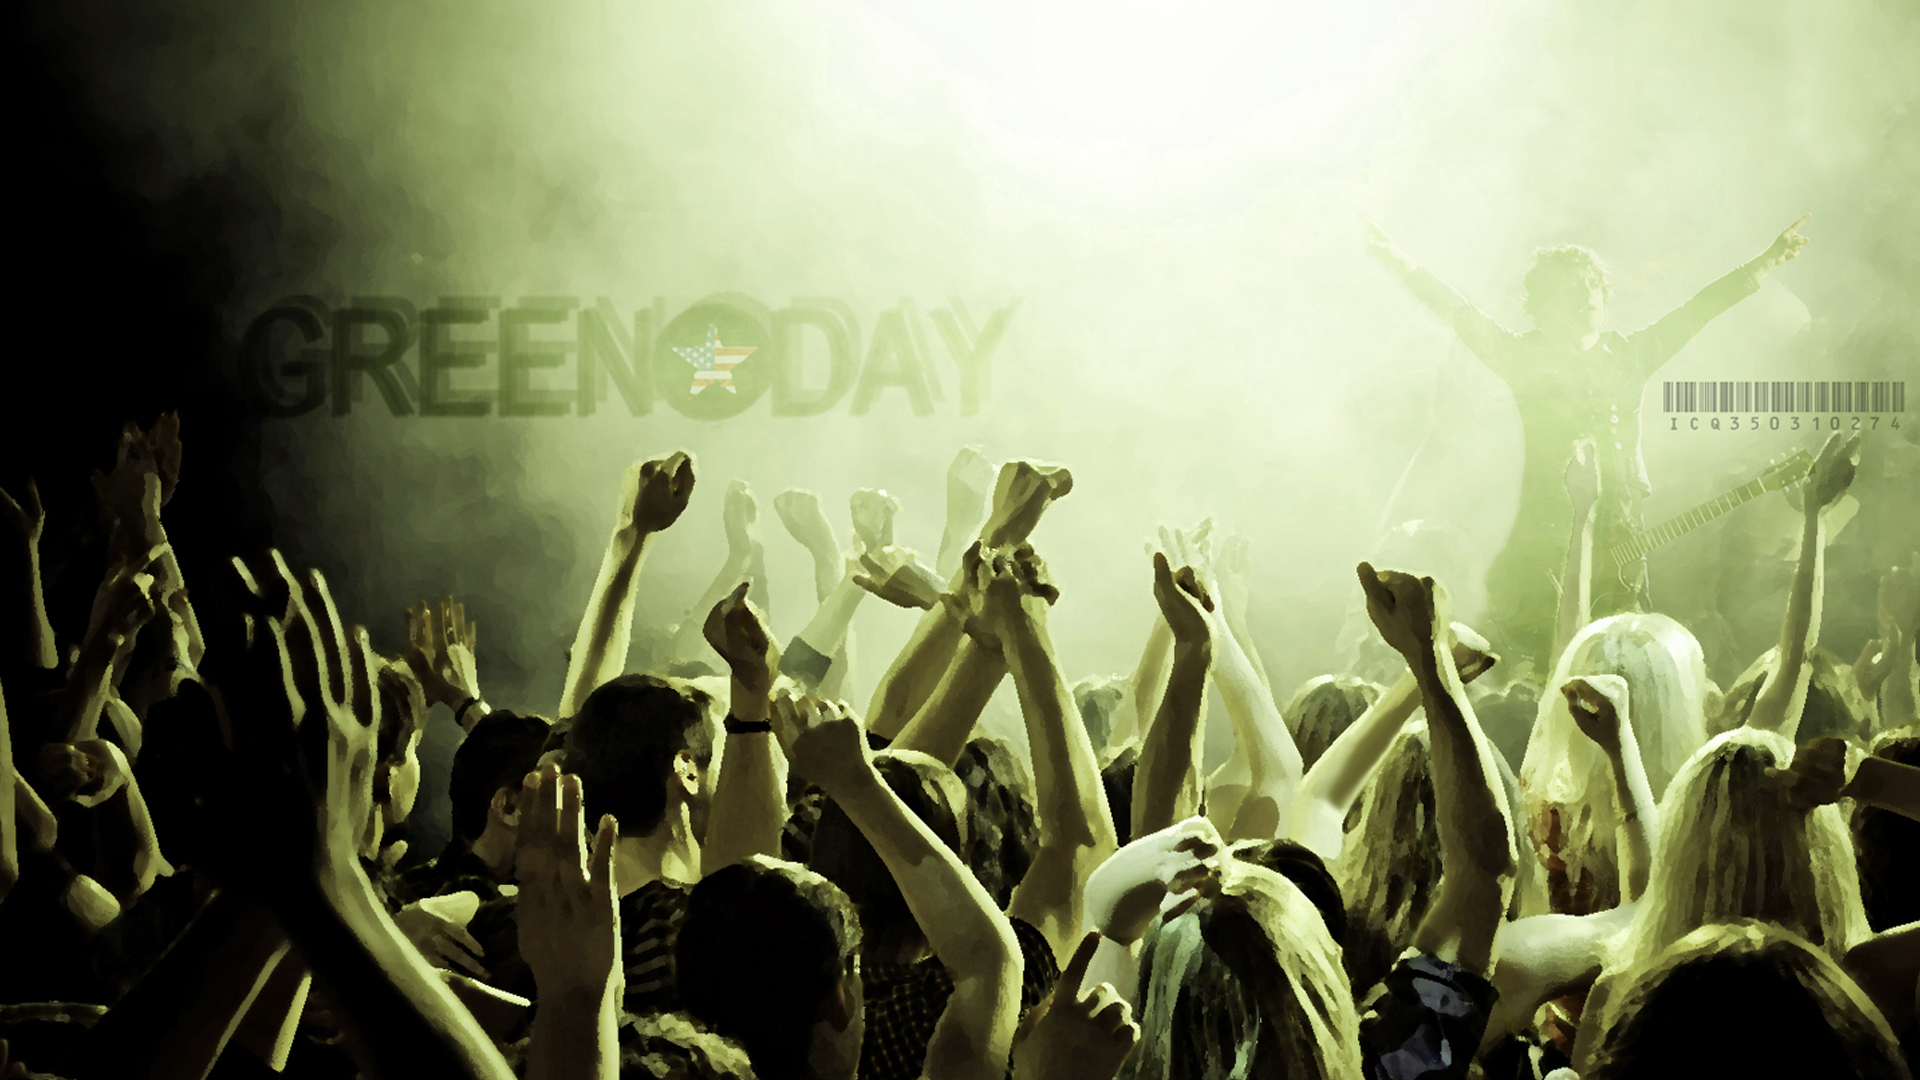 music, green day images